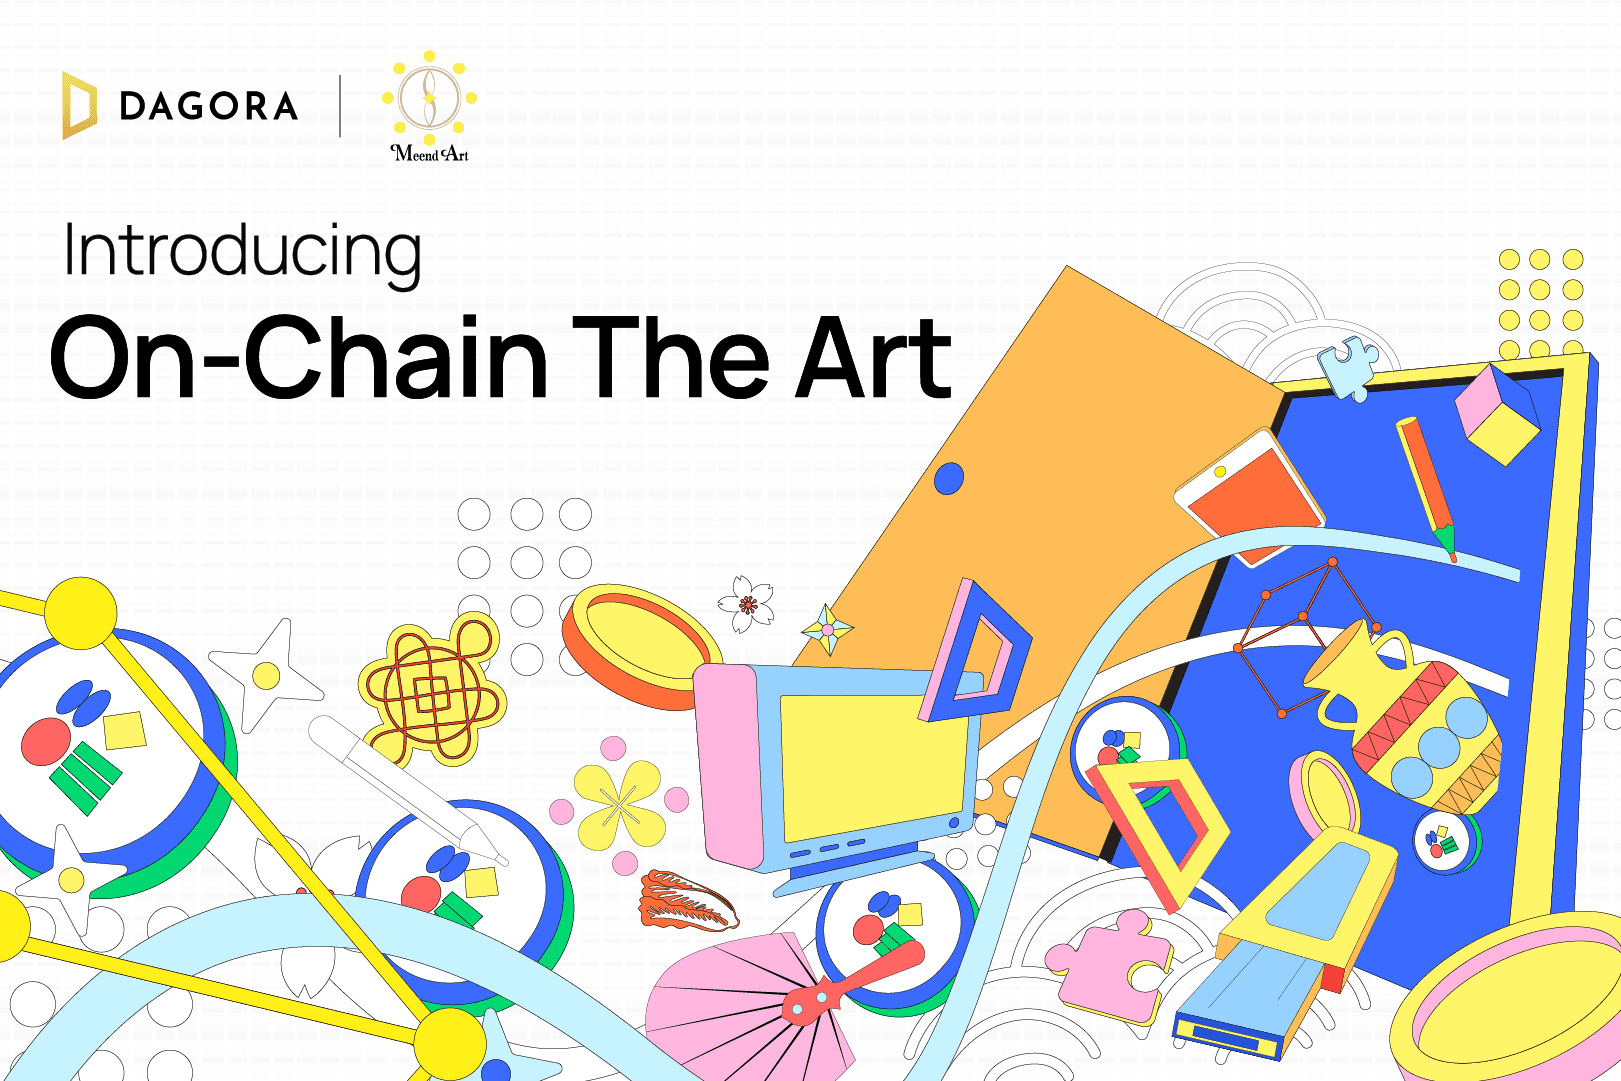 Dagora introduces 'On-Chain the Art', Unfolding a New Dawn for Web2 Artists to Shine in the NFT Universe